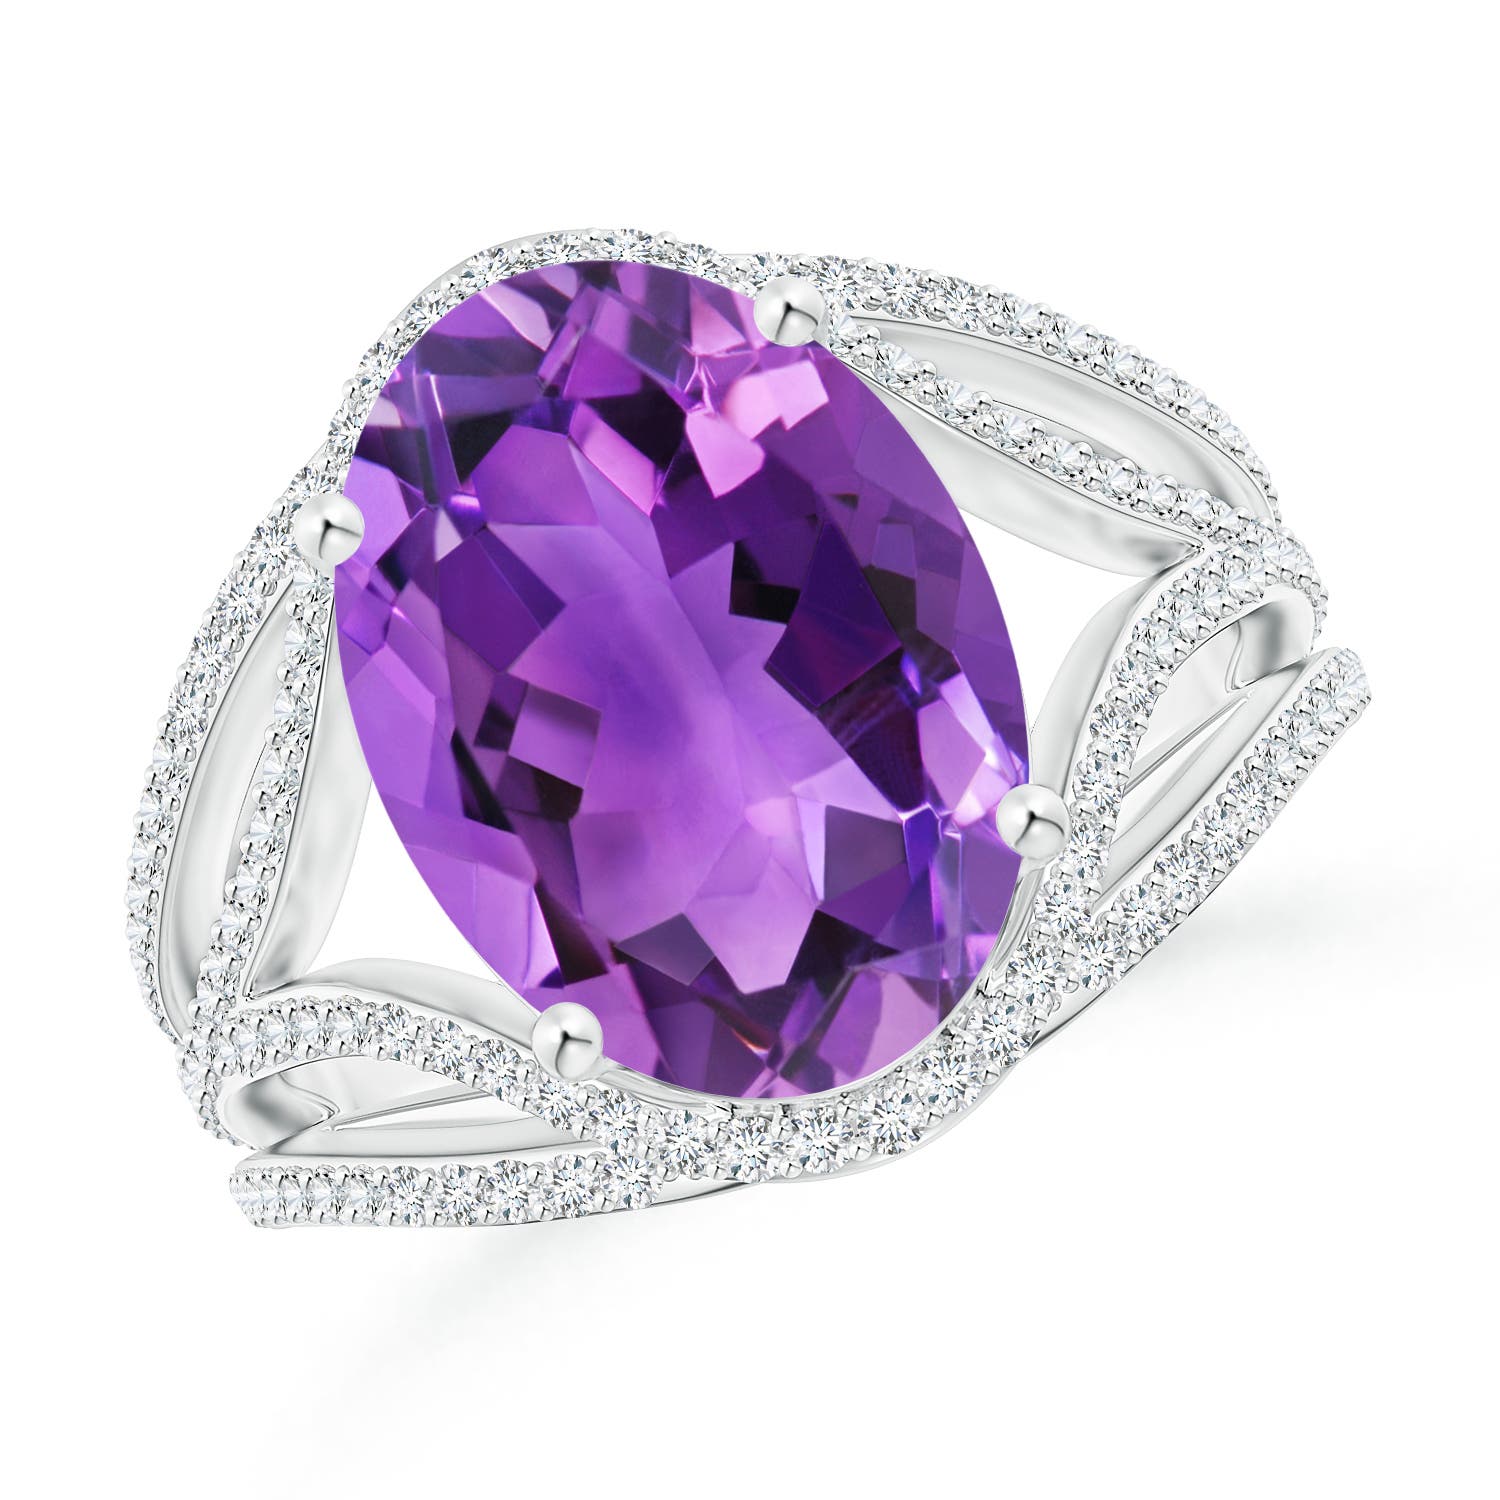 AAA - Amethyst / 5.89 CT / 14 KT White Gold